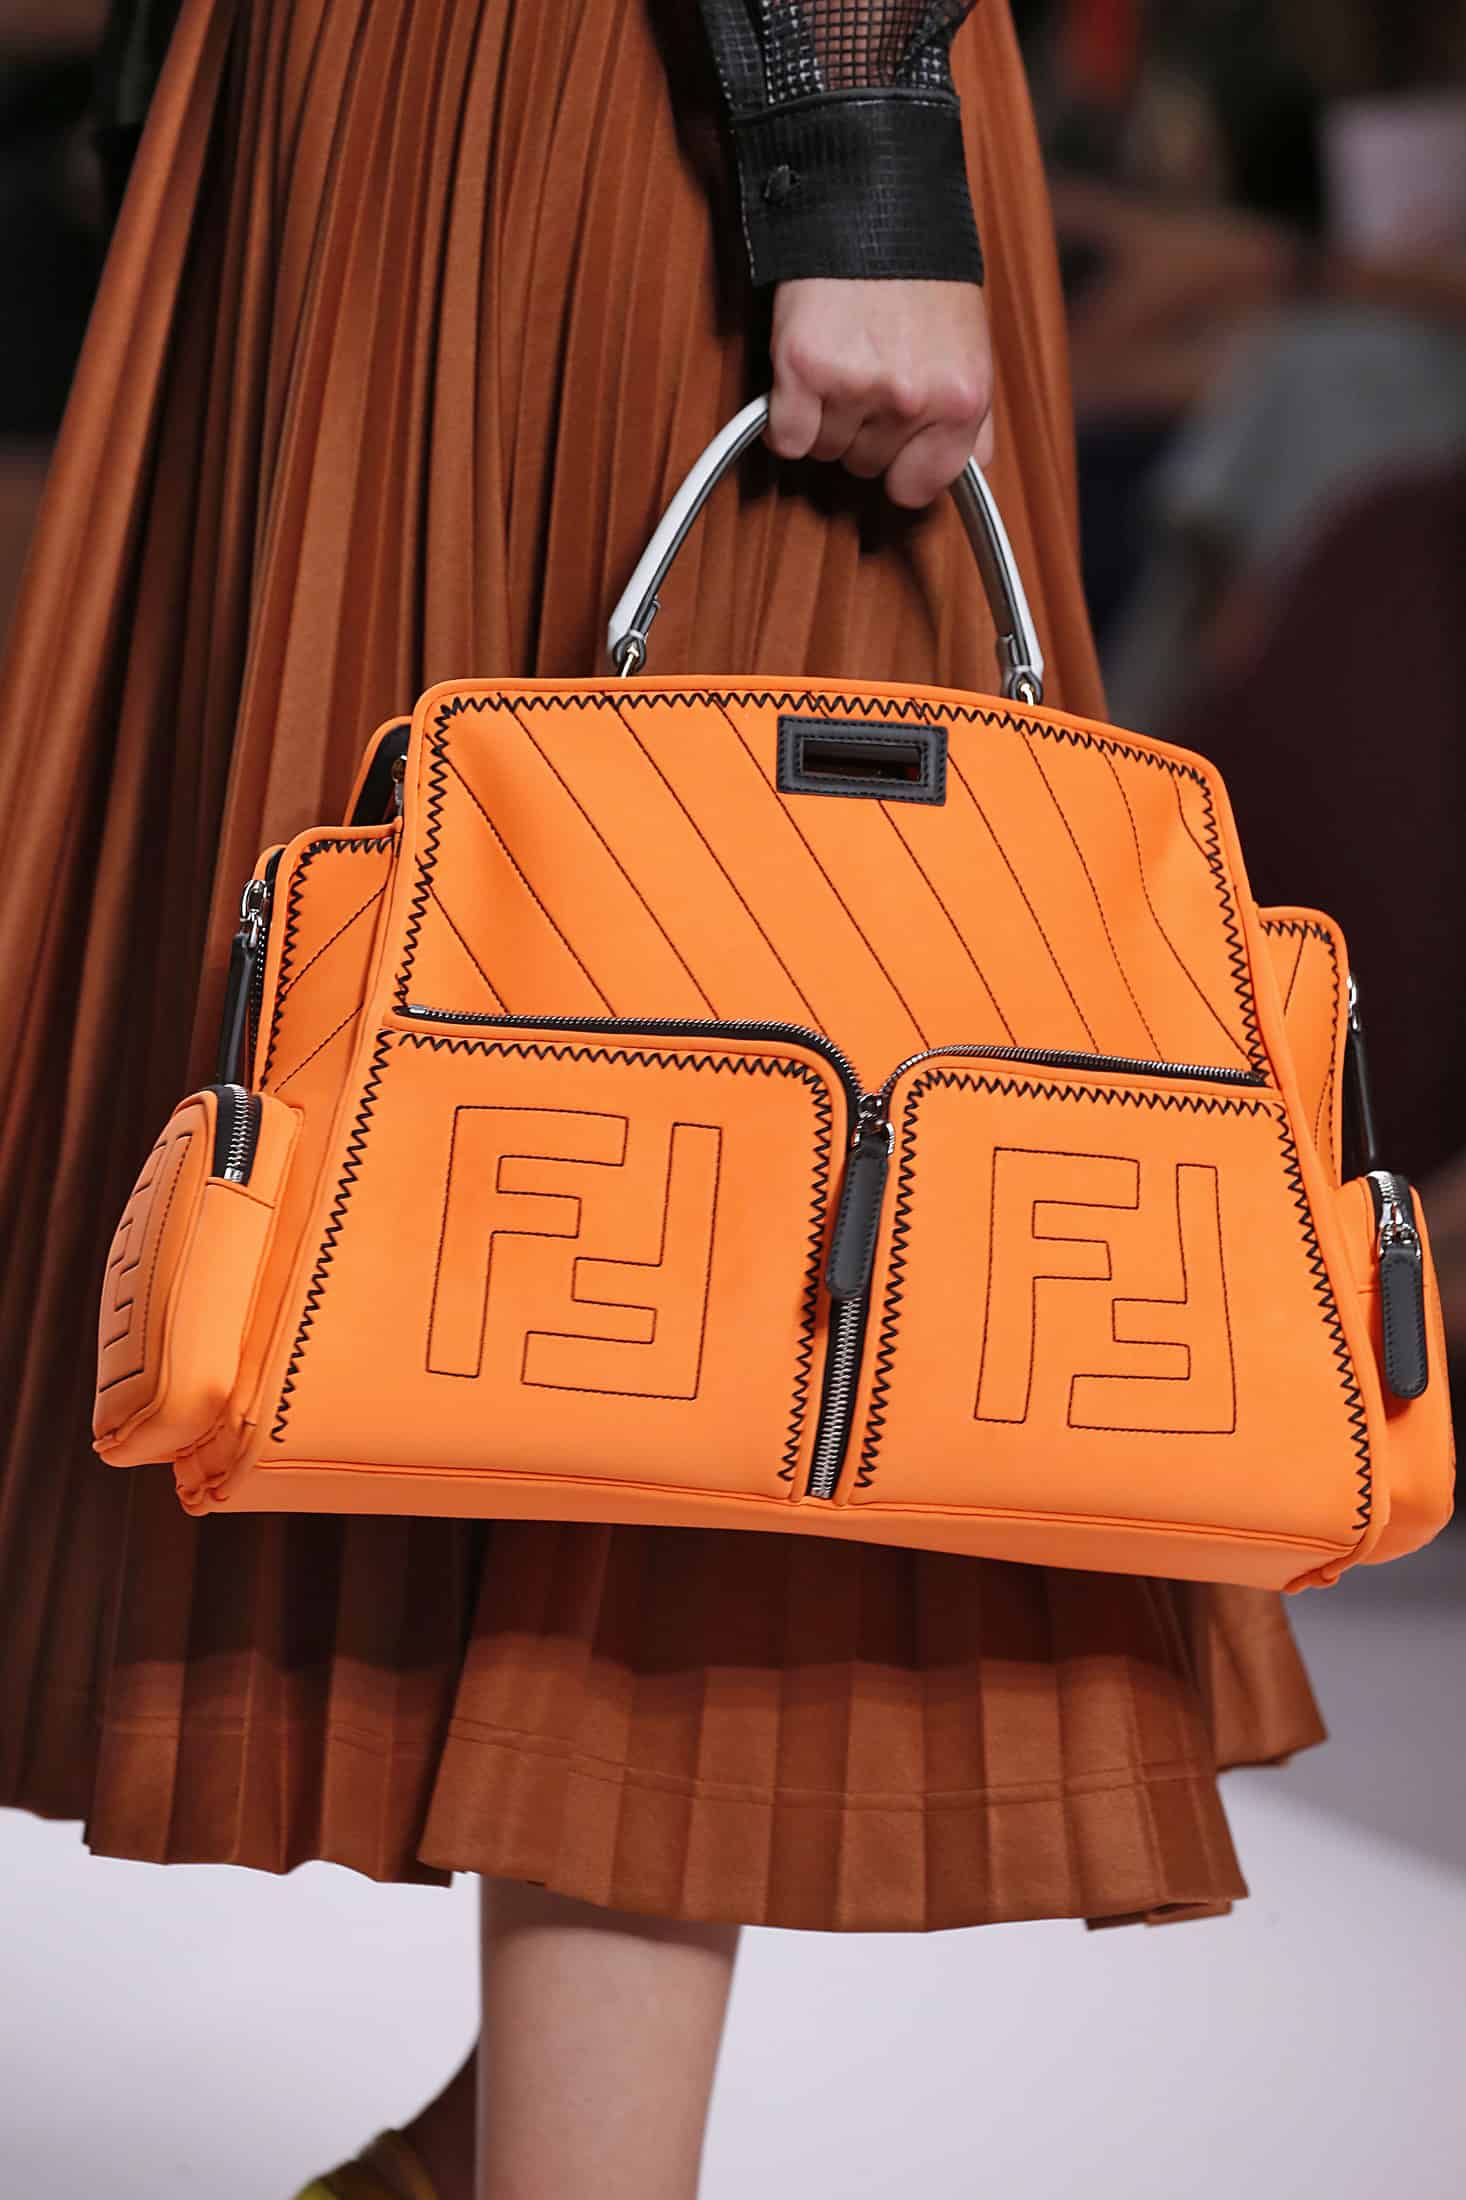 Fendi FF Tote the new must-have bag for the Resort 2019 Collection